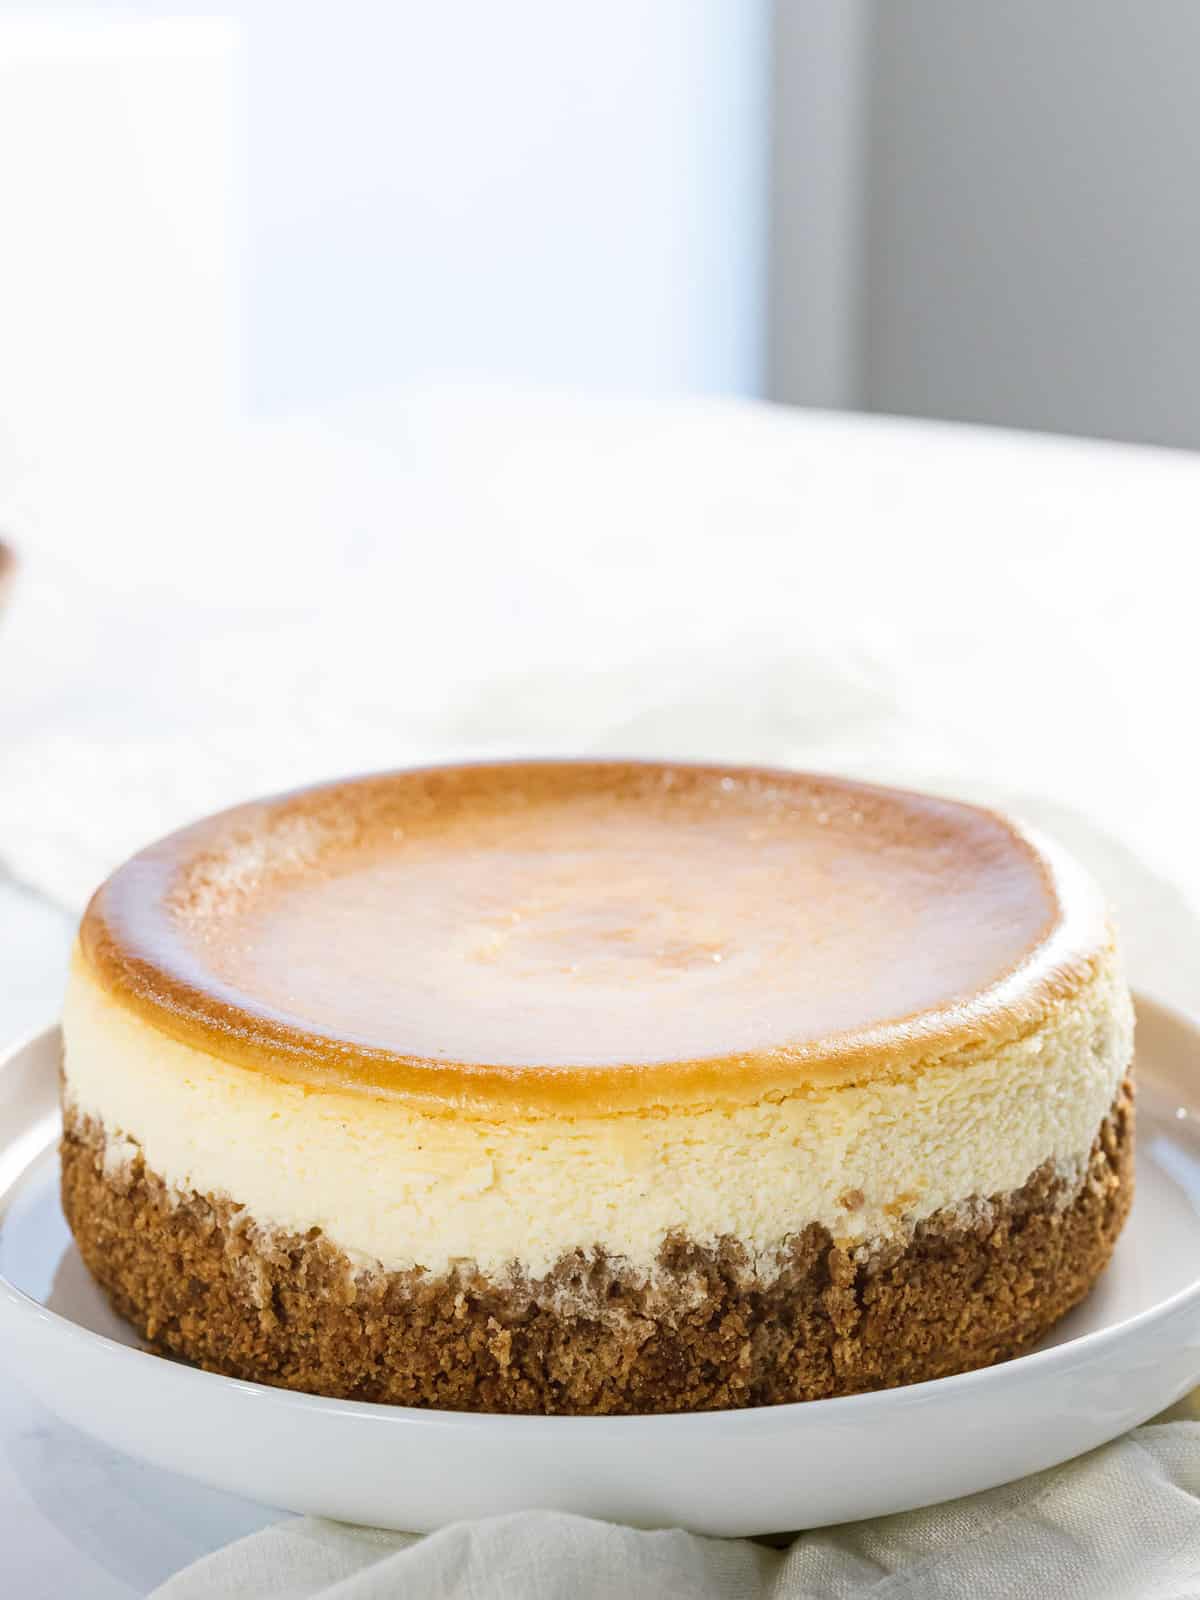 Classic New York-style cheesecake with no cracks.